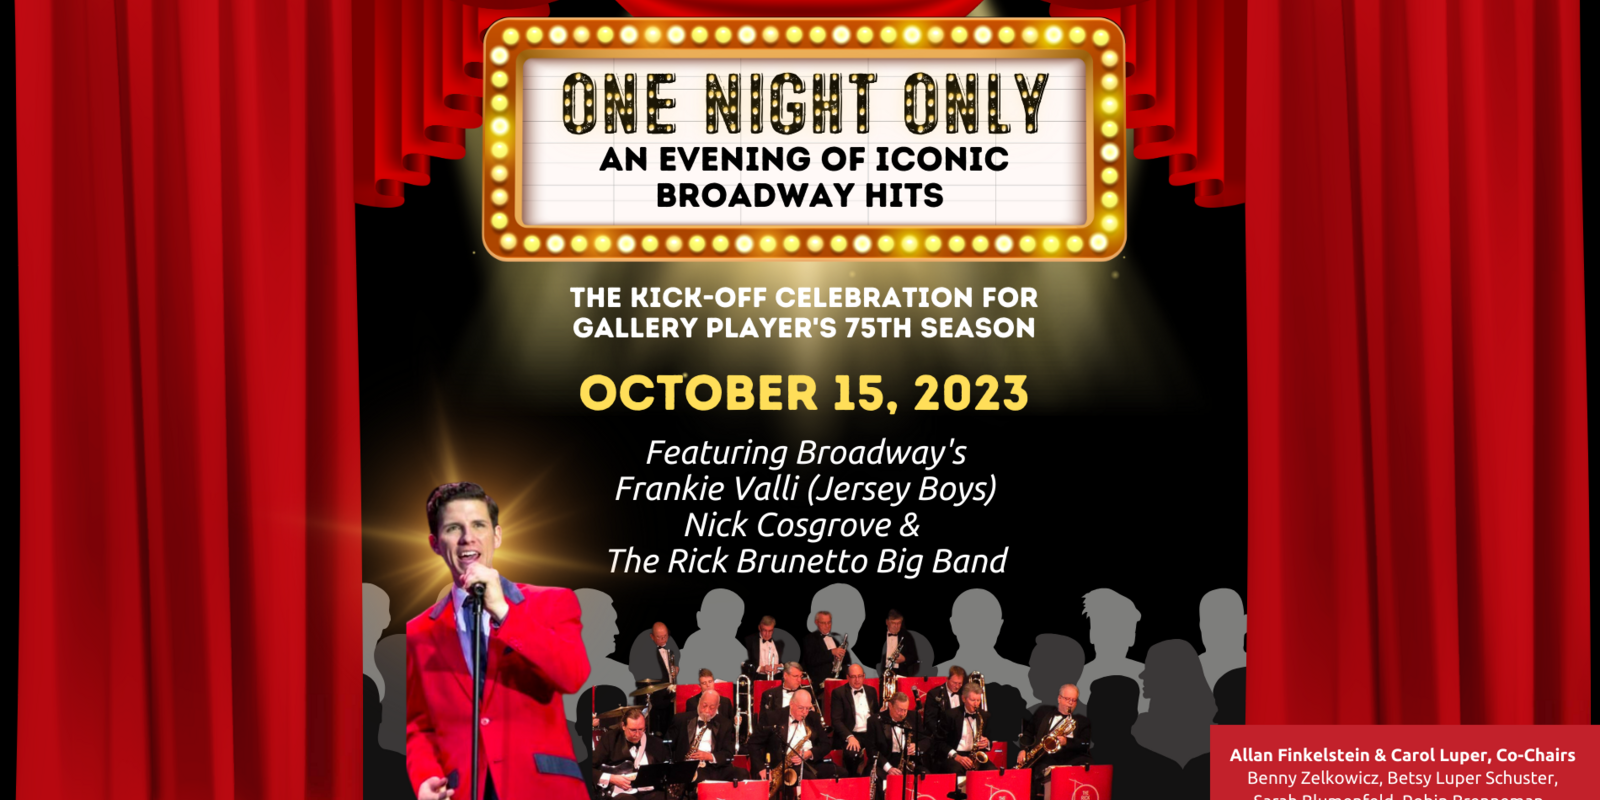 One Night Only: An Evening of Iconic Broadway Hits